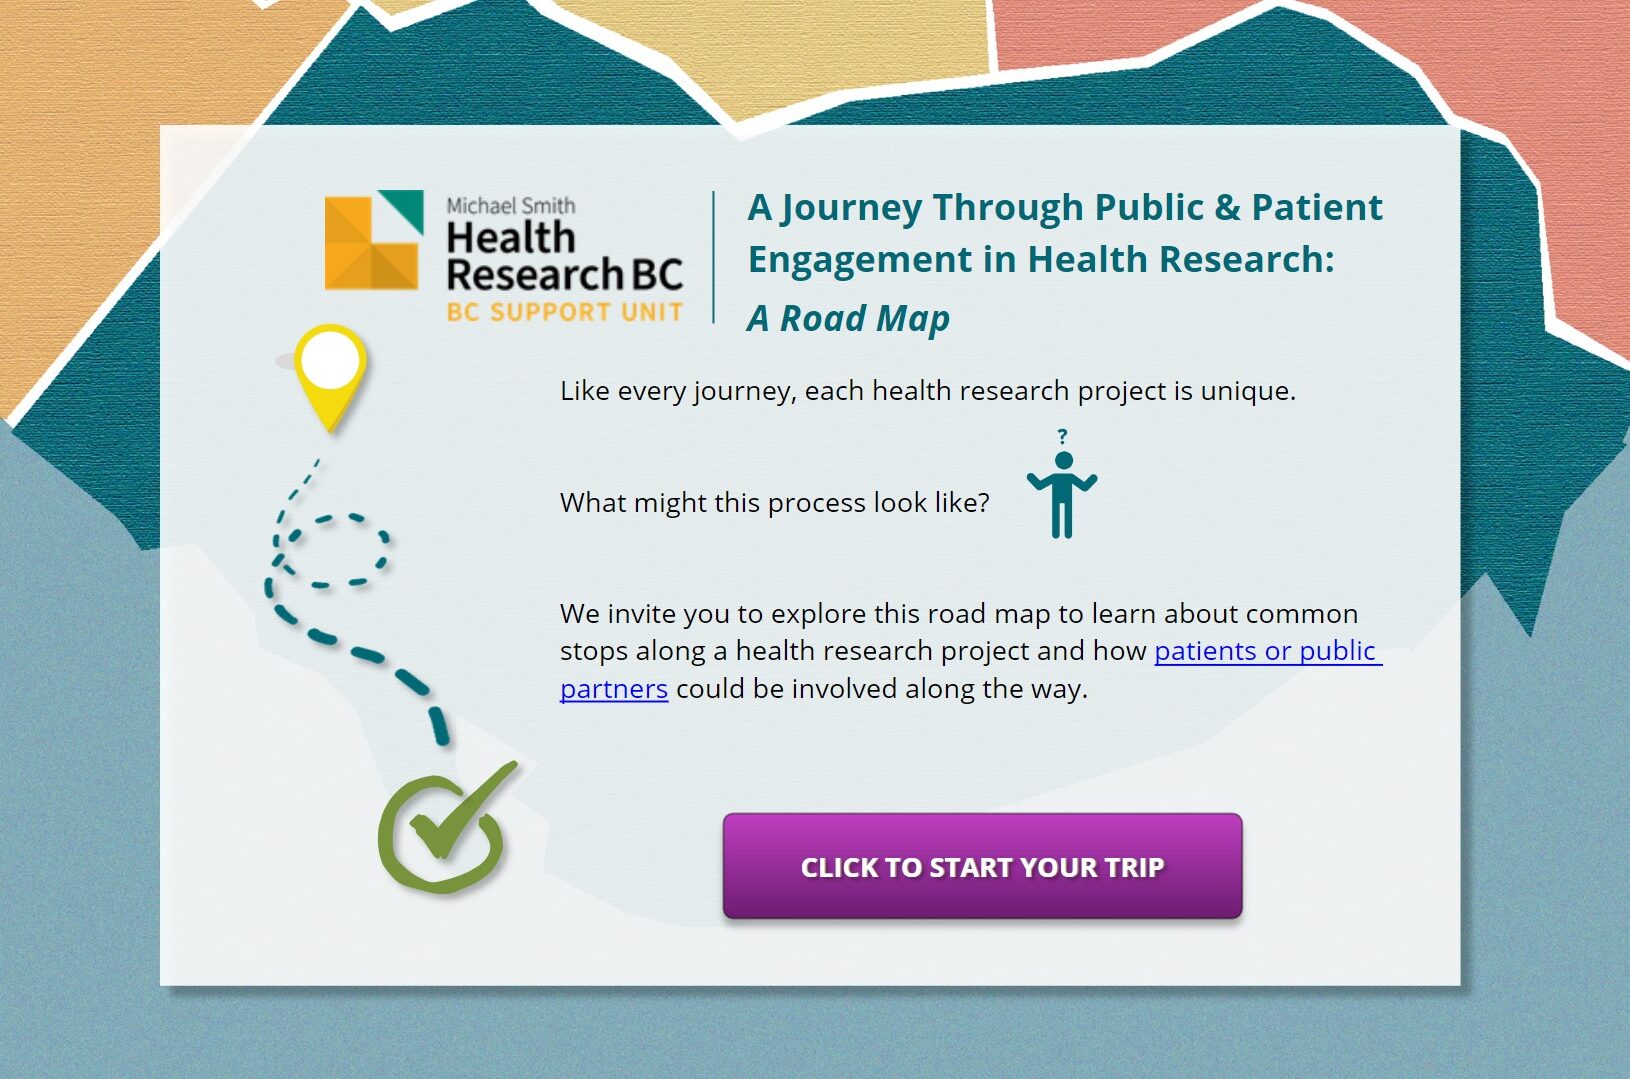 Introductory slide of the road map, with a brightly coloured map in the background. The slide depicts a journey through public and patient engagement in health research: A road map. Like every journey, each health research project is unique. What might this process look like? We invite you to explore this map to learn more about common stops along a project and how patients or public partners could be involved along the way. You can click the introductory slide to start your trip.